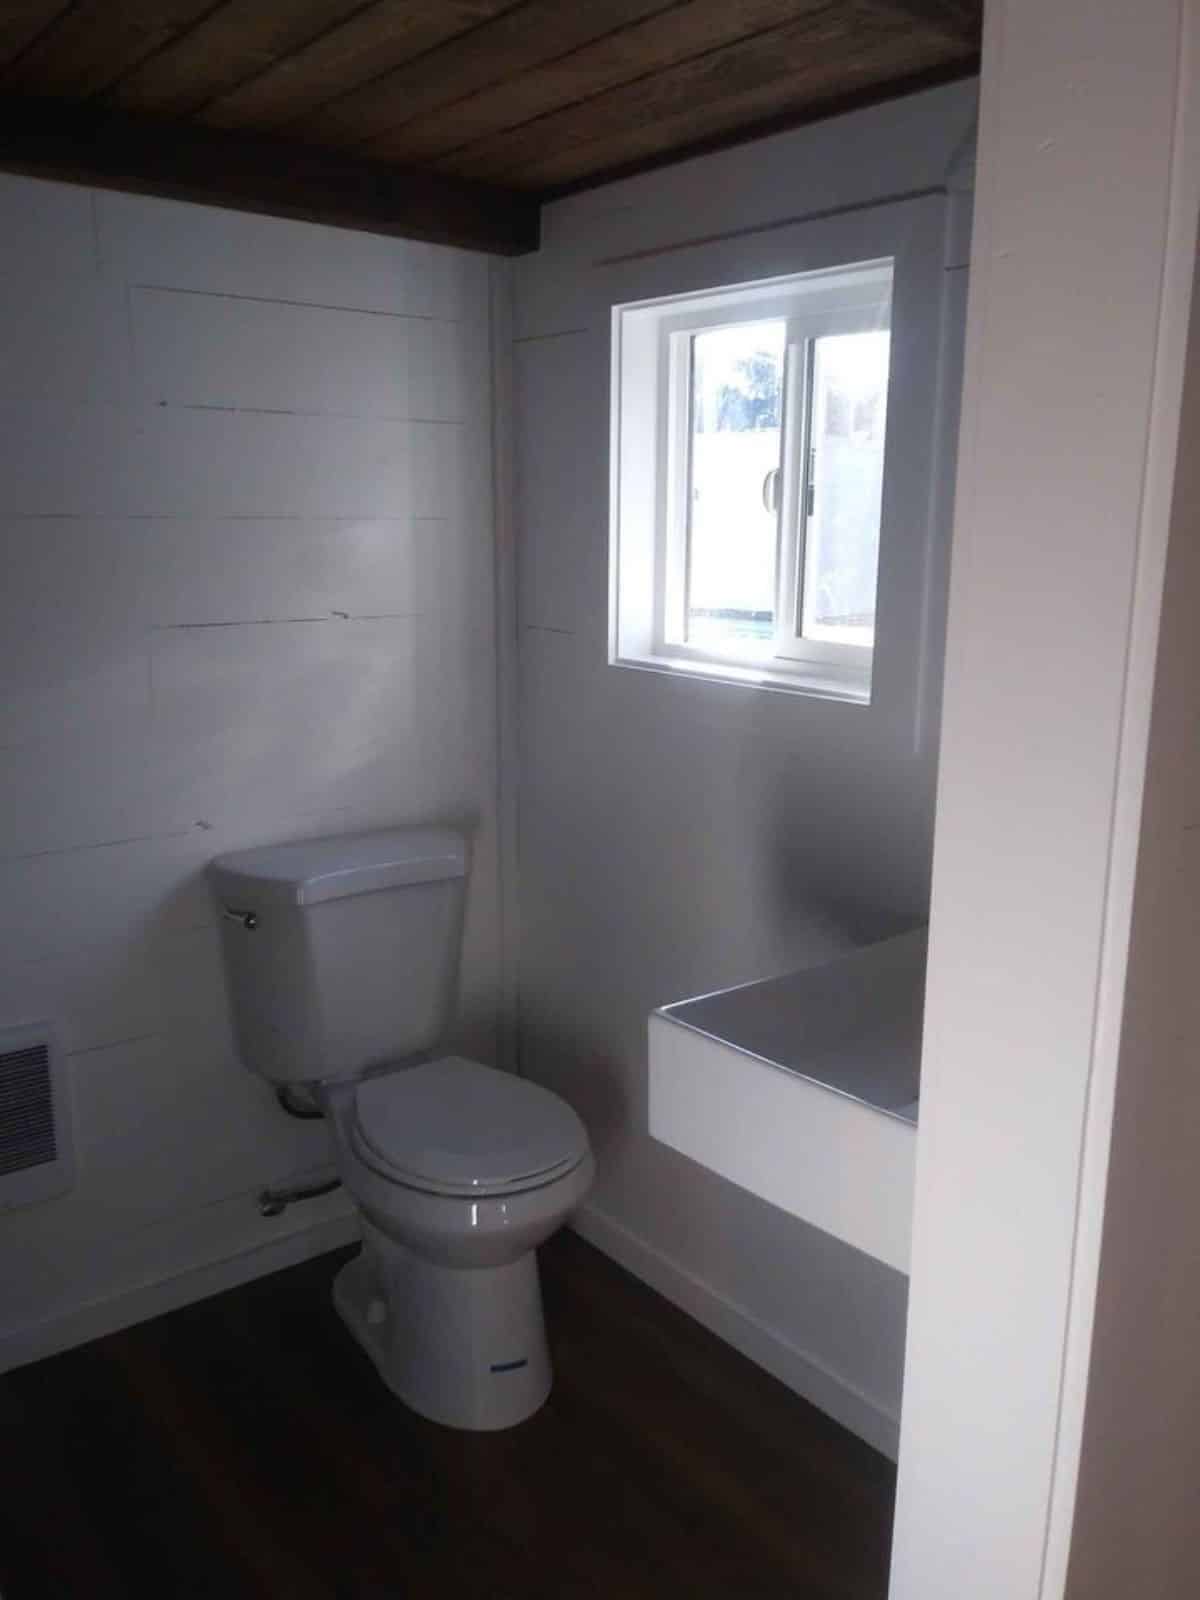 bathroom of tiny getaway cabin has all the standard fittings